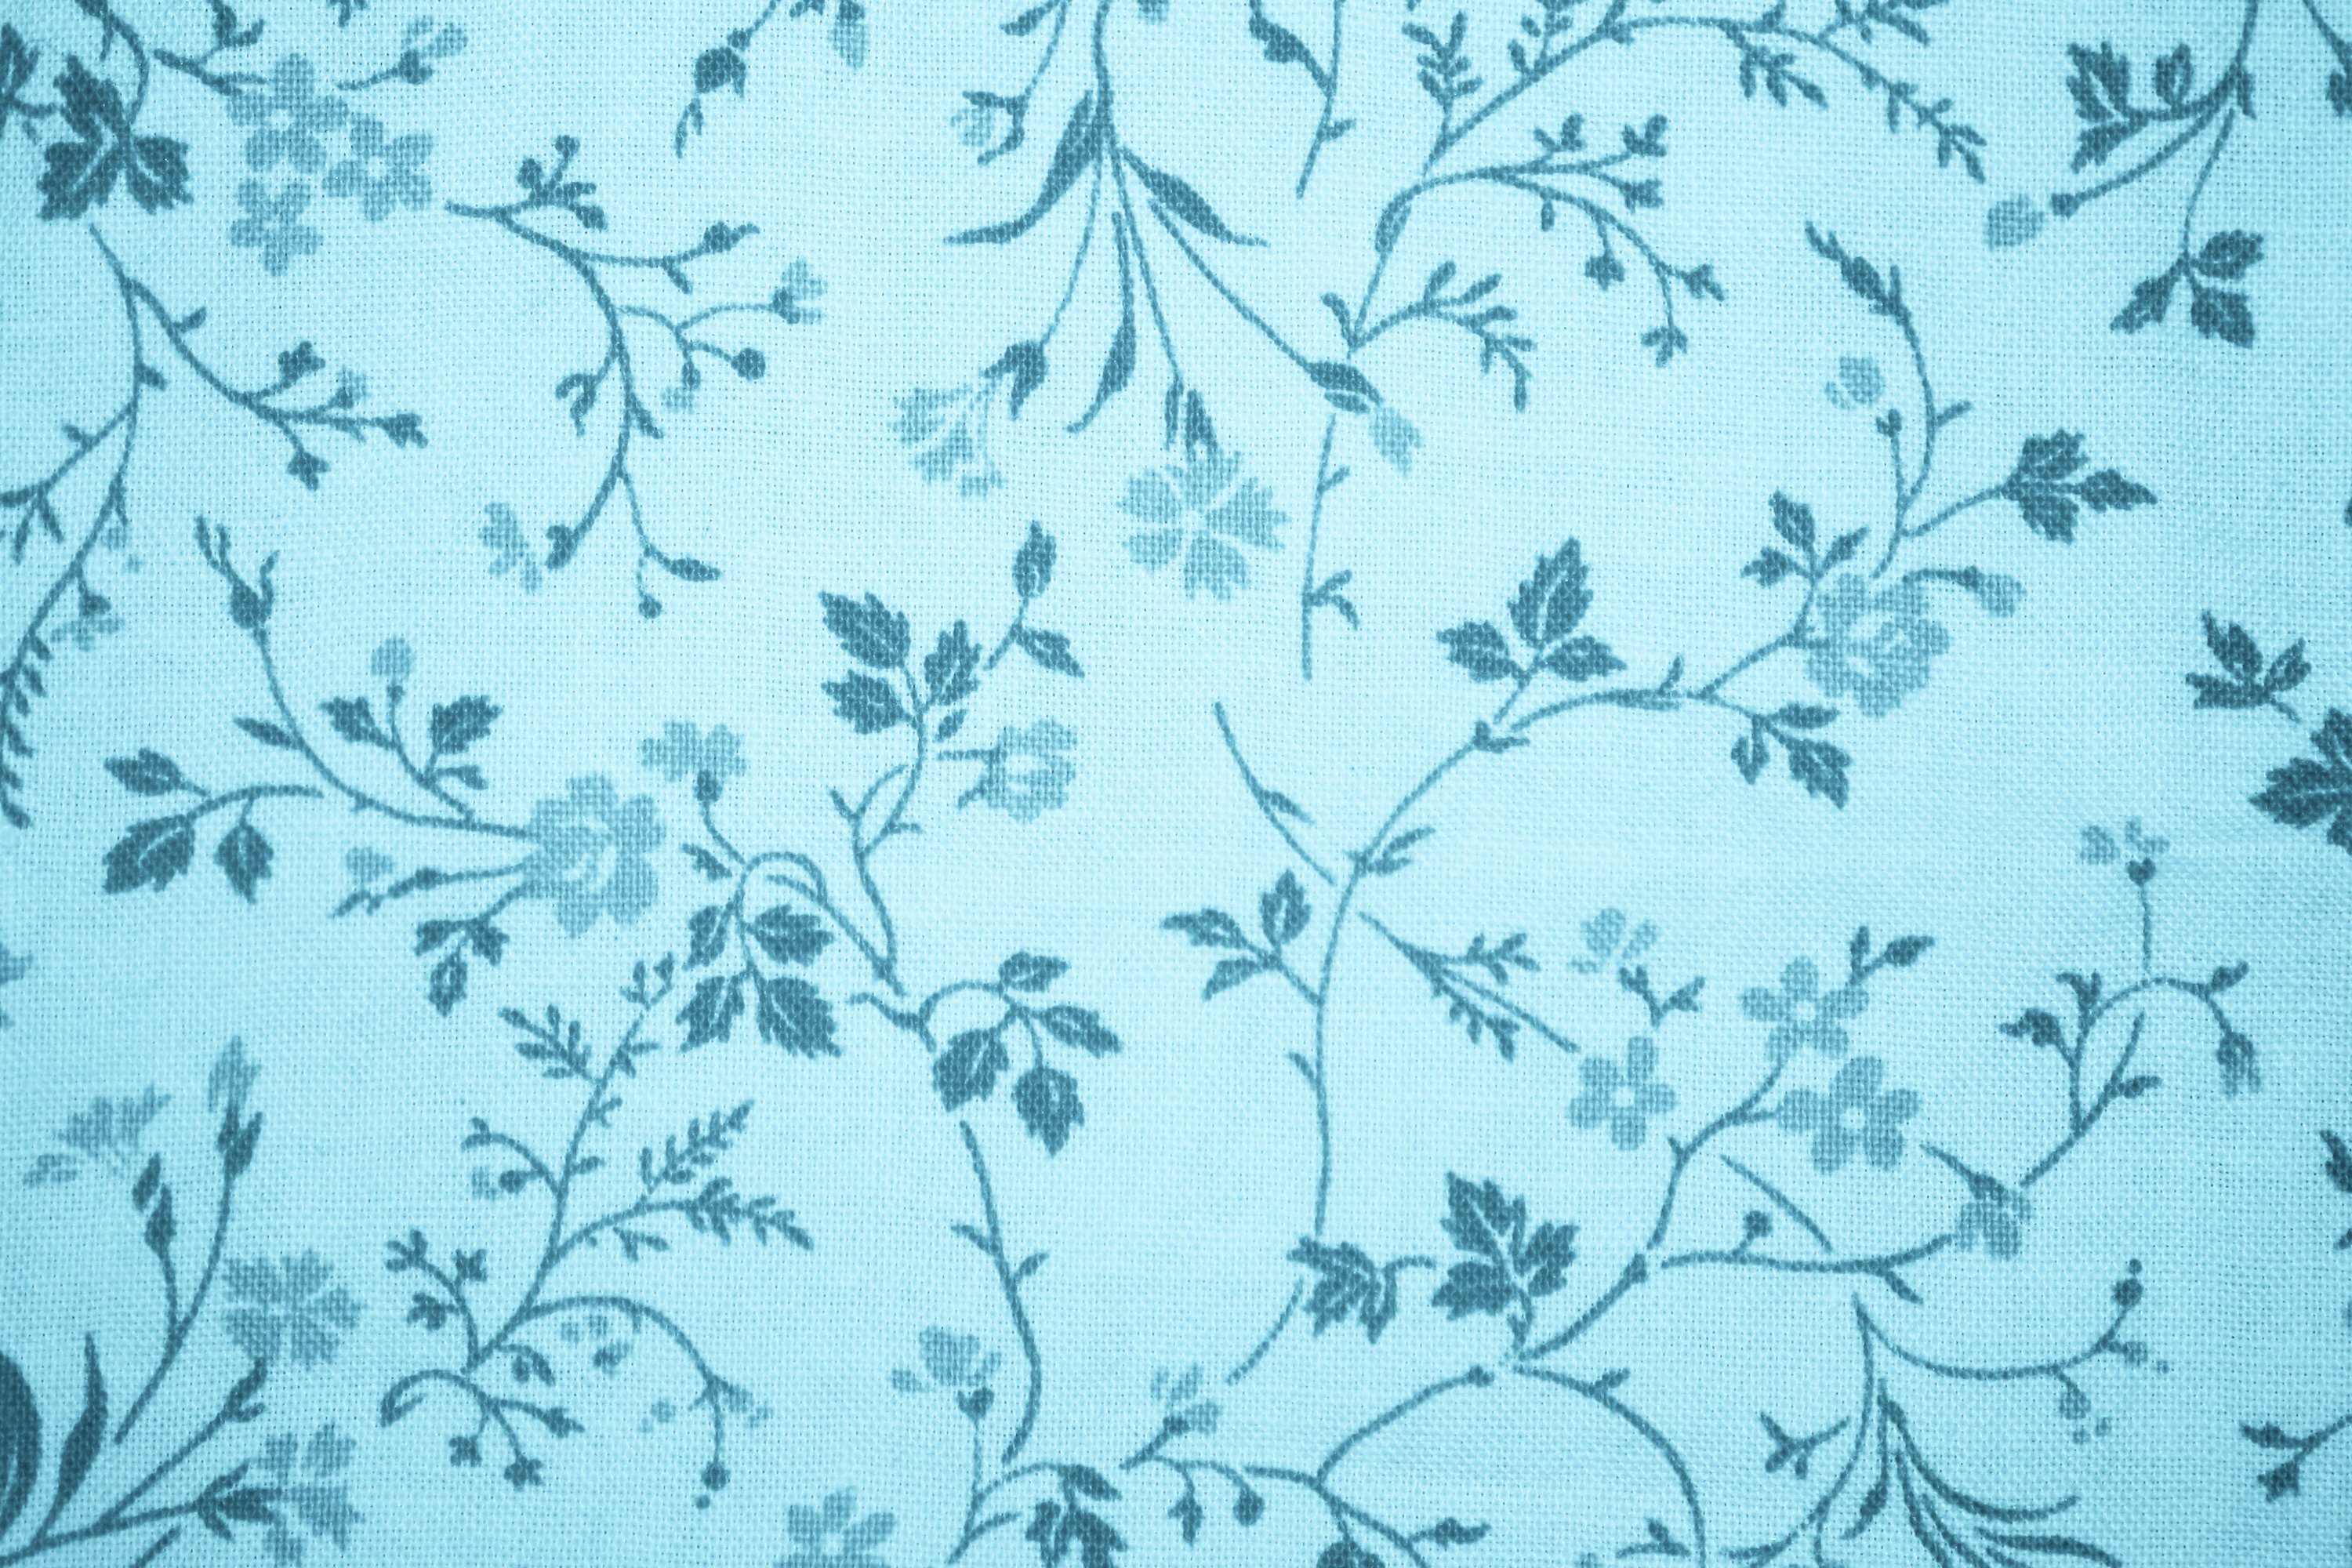 Light Blue Floral Print Fabric Texture Picture | Free Photograph ...